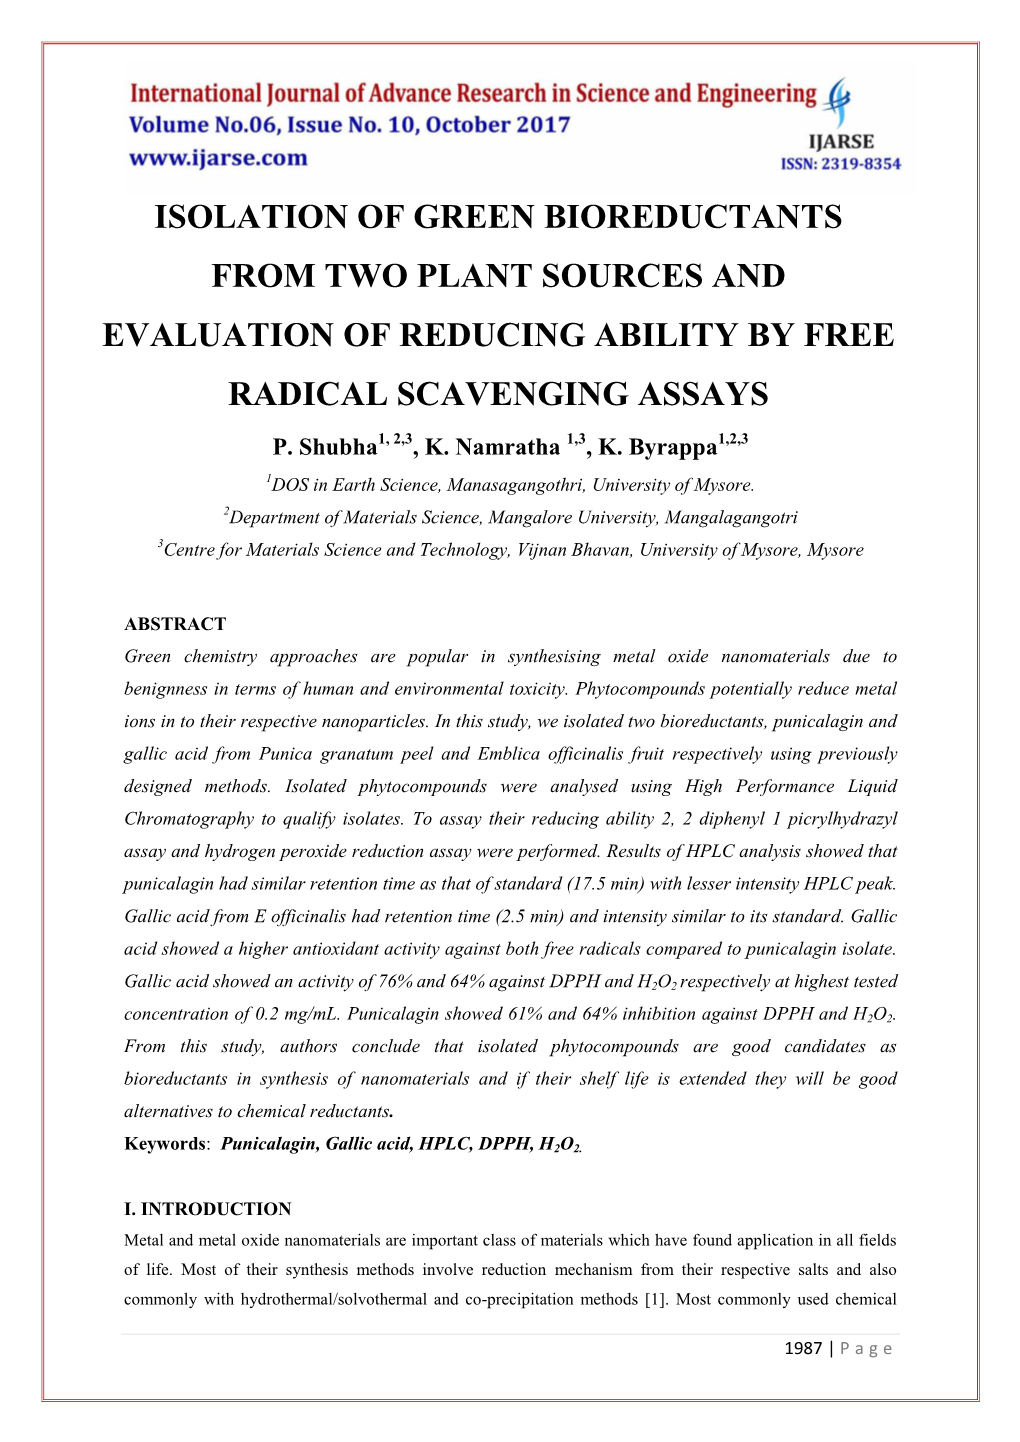 Isolation of Green Bioreductants from Two Plant Sources and Evaluation of Reducing Ability by Free Radical Scavenging Assays P